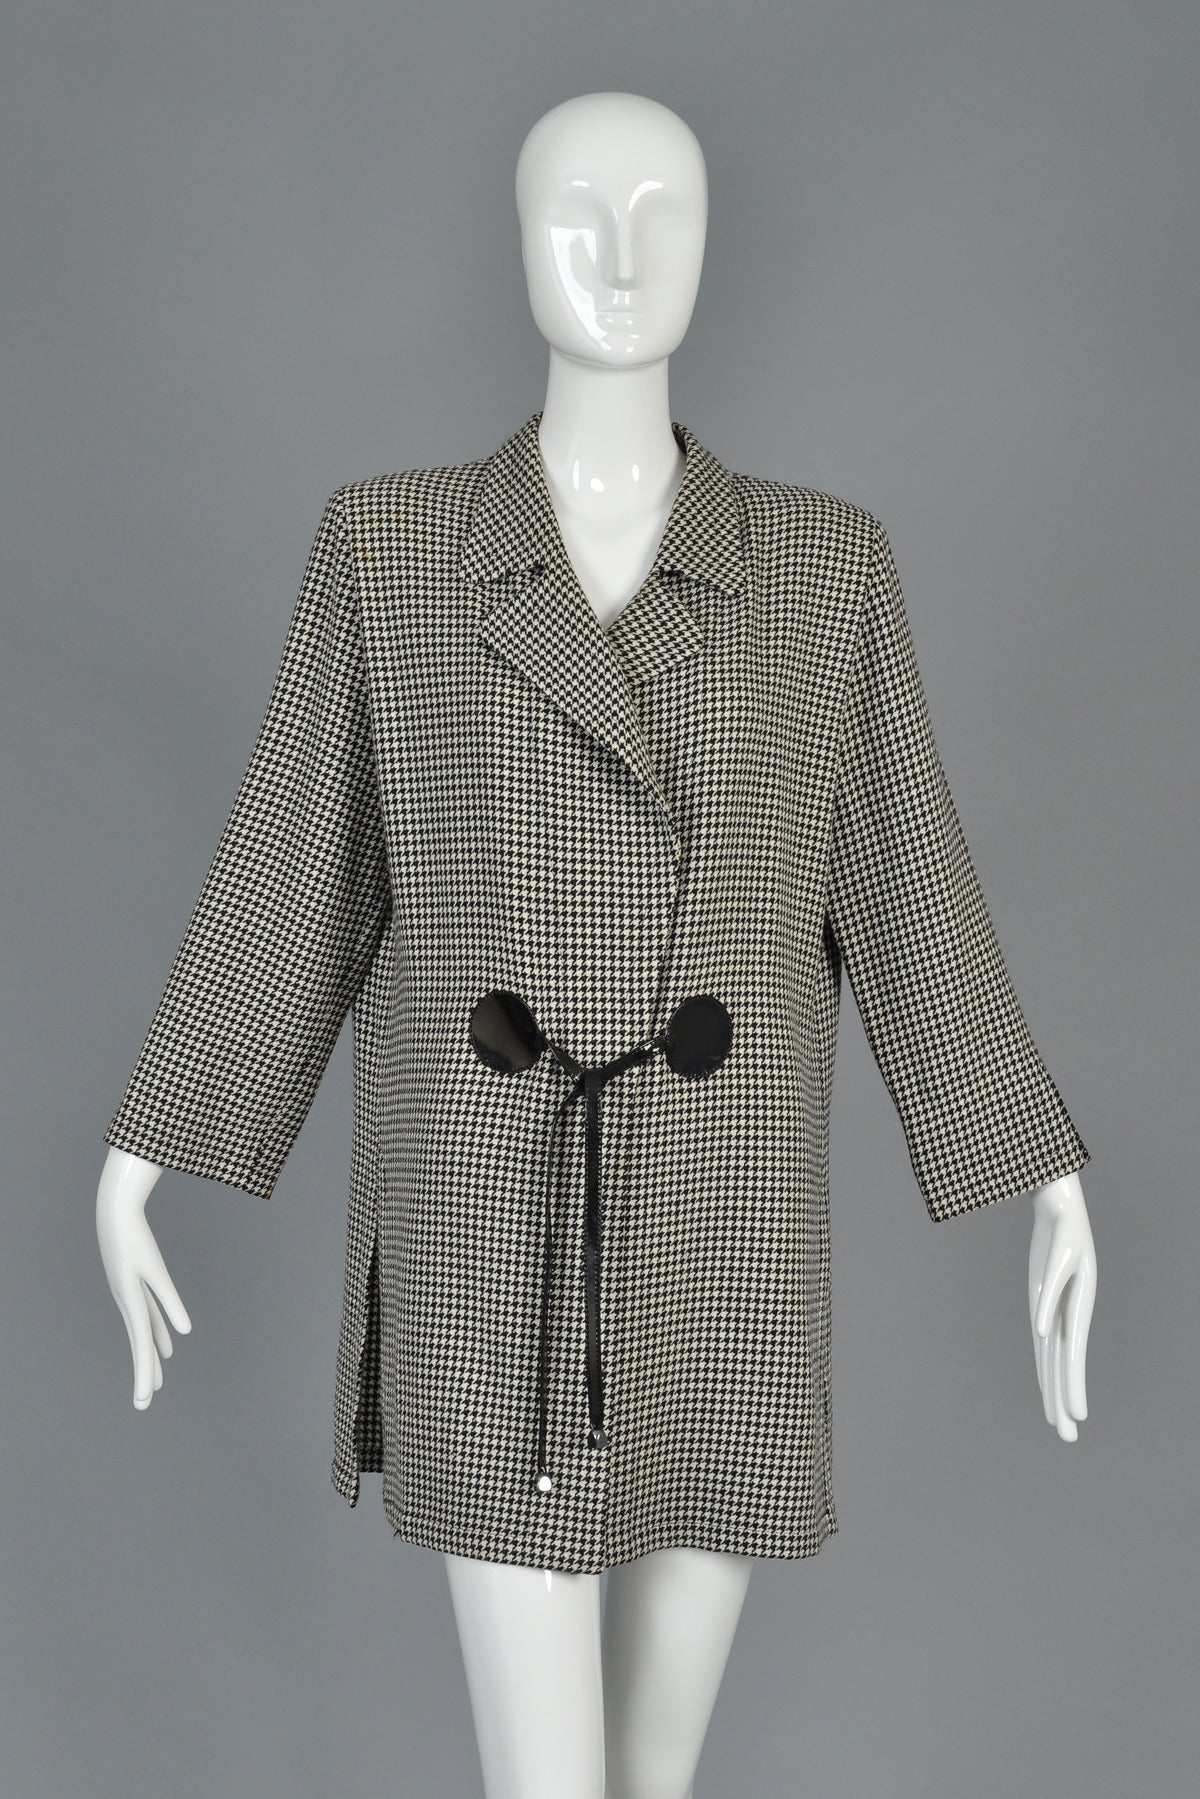 Beautiful vintage 1990s haute couture hounstooth jacket by Pierre Cardin. Circa 1993. Incredible classic Cardin avant garde construction featuring his signature vinyl circle ties at the waist. Oversized shoulders with slightly nipped waist and huge